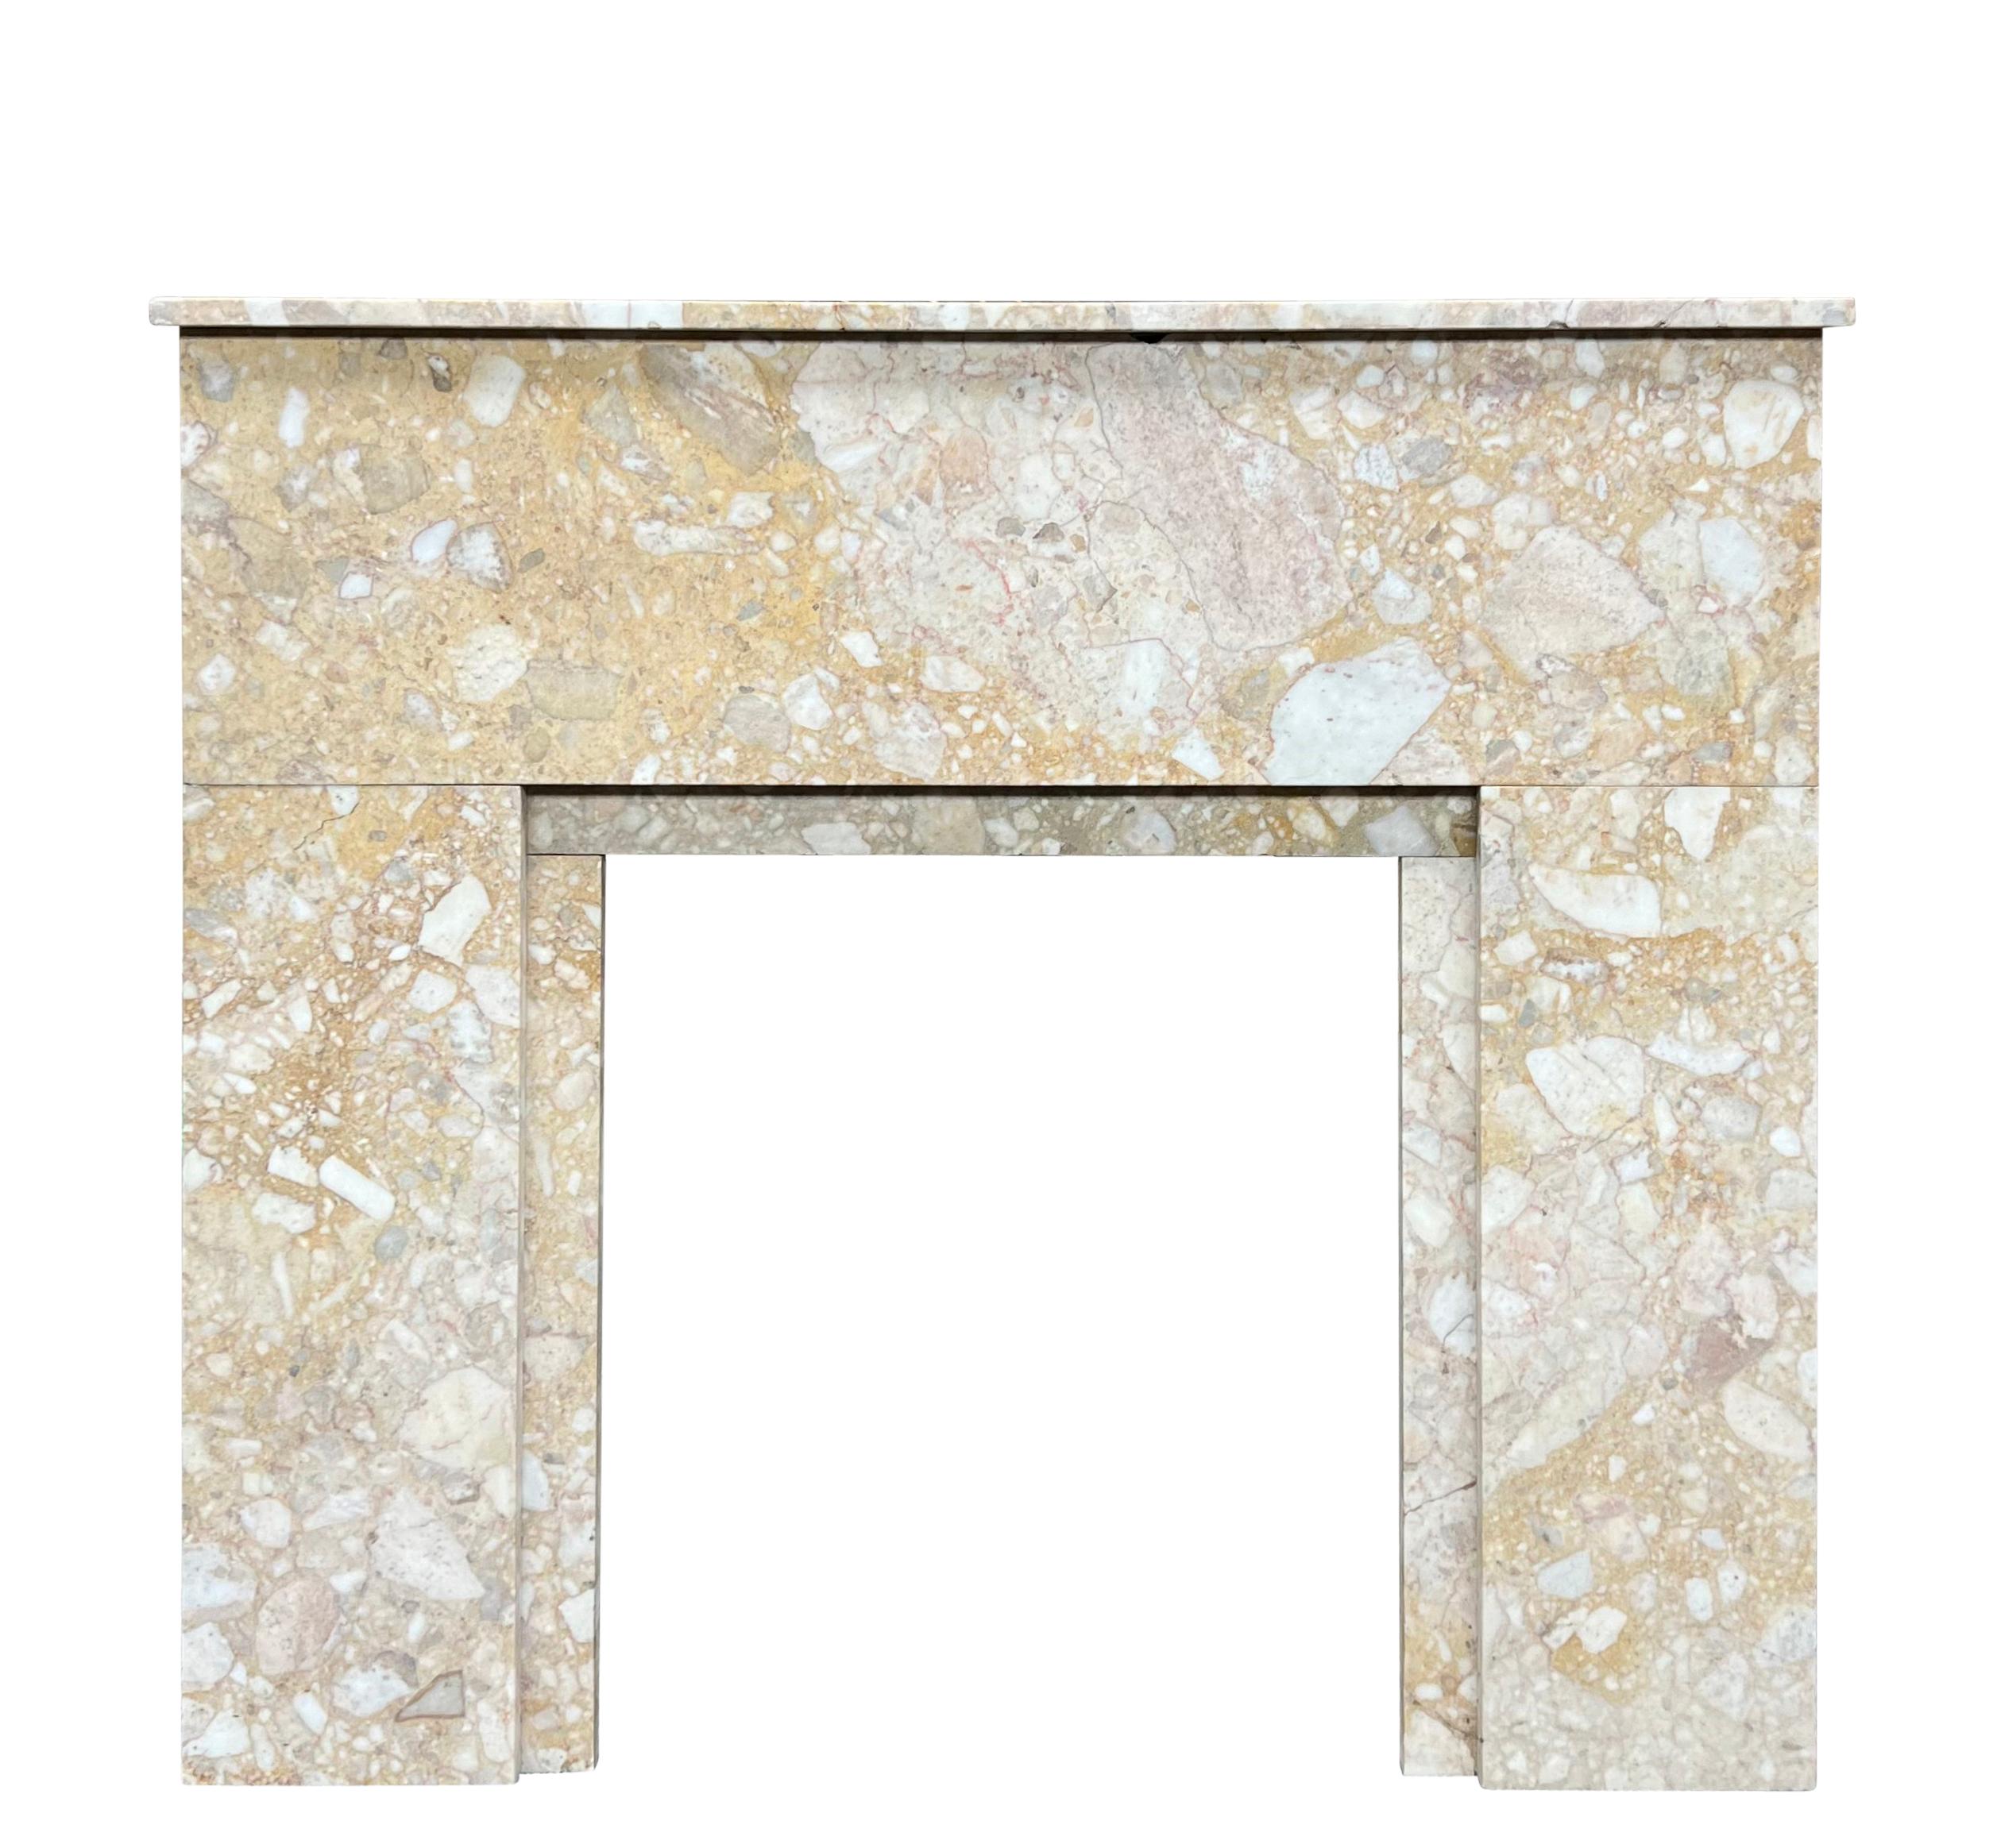 This is a fine vintage Art deco period fireplace surround. The Brêche marble is a one of a kind type of marble that is supporting to the mantle. some veins are reinforced on the tablet. The fireplace surround was installed in Parisian apartment on